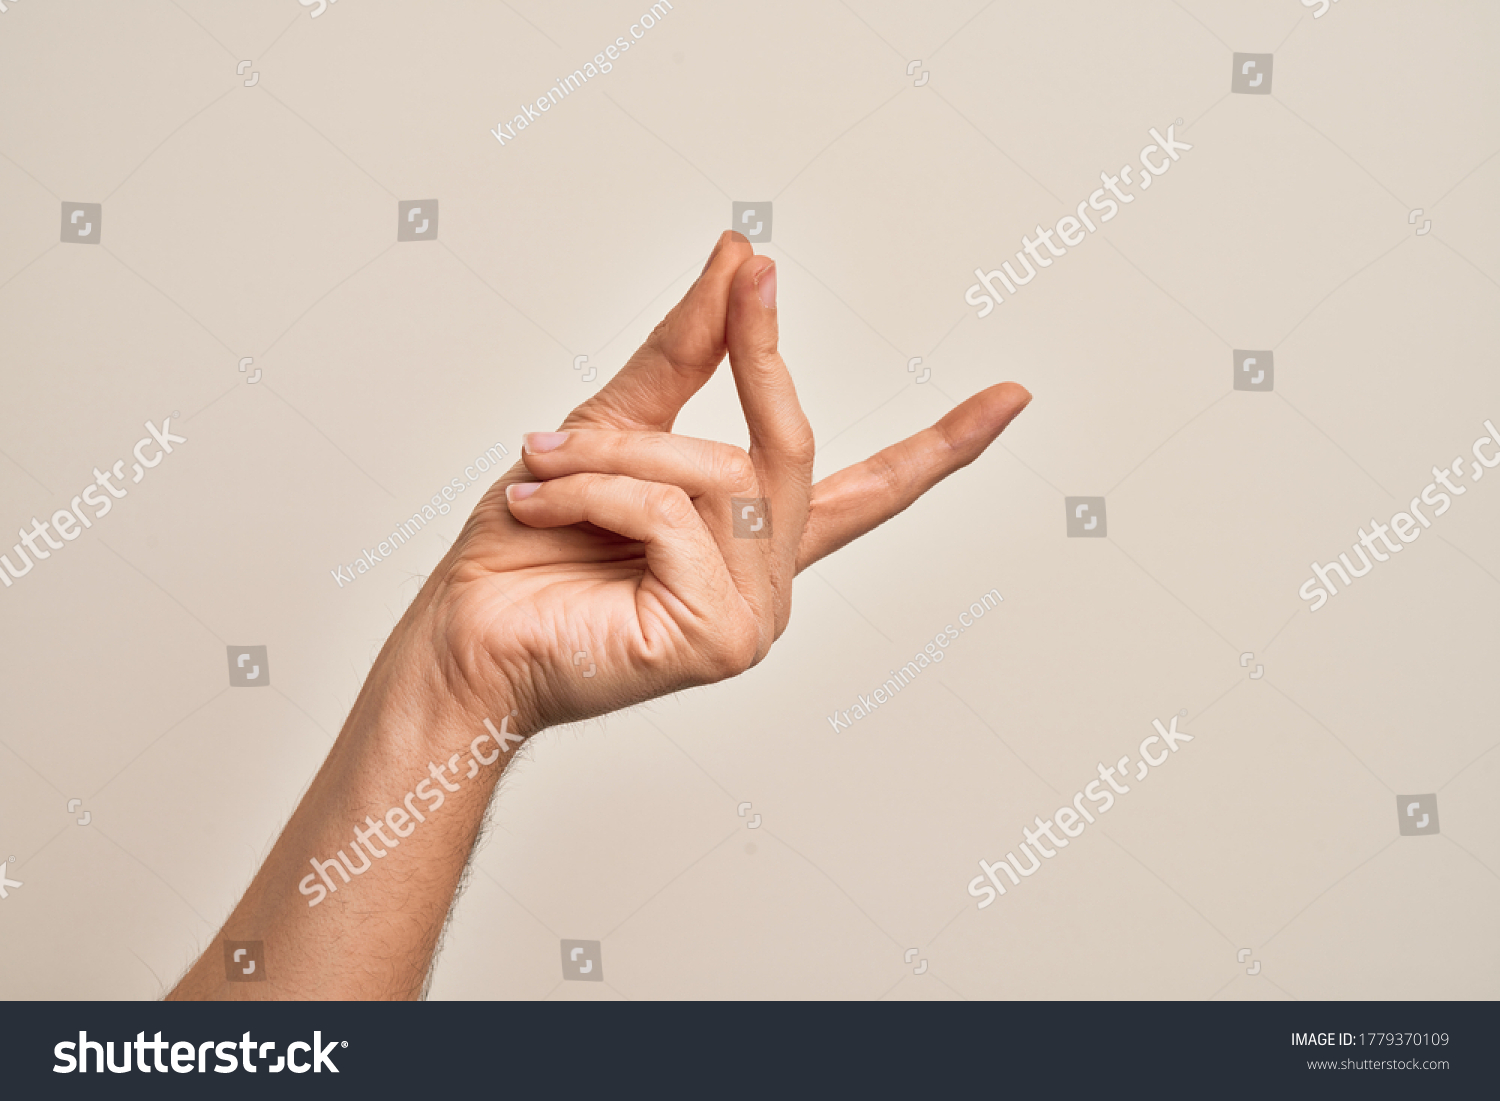 Hand of caucasian young man showing fingers over isolated white background snapping fingers for success, easy and click symbol gesture with hand #1779370109